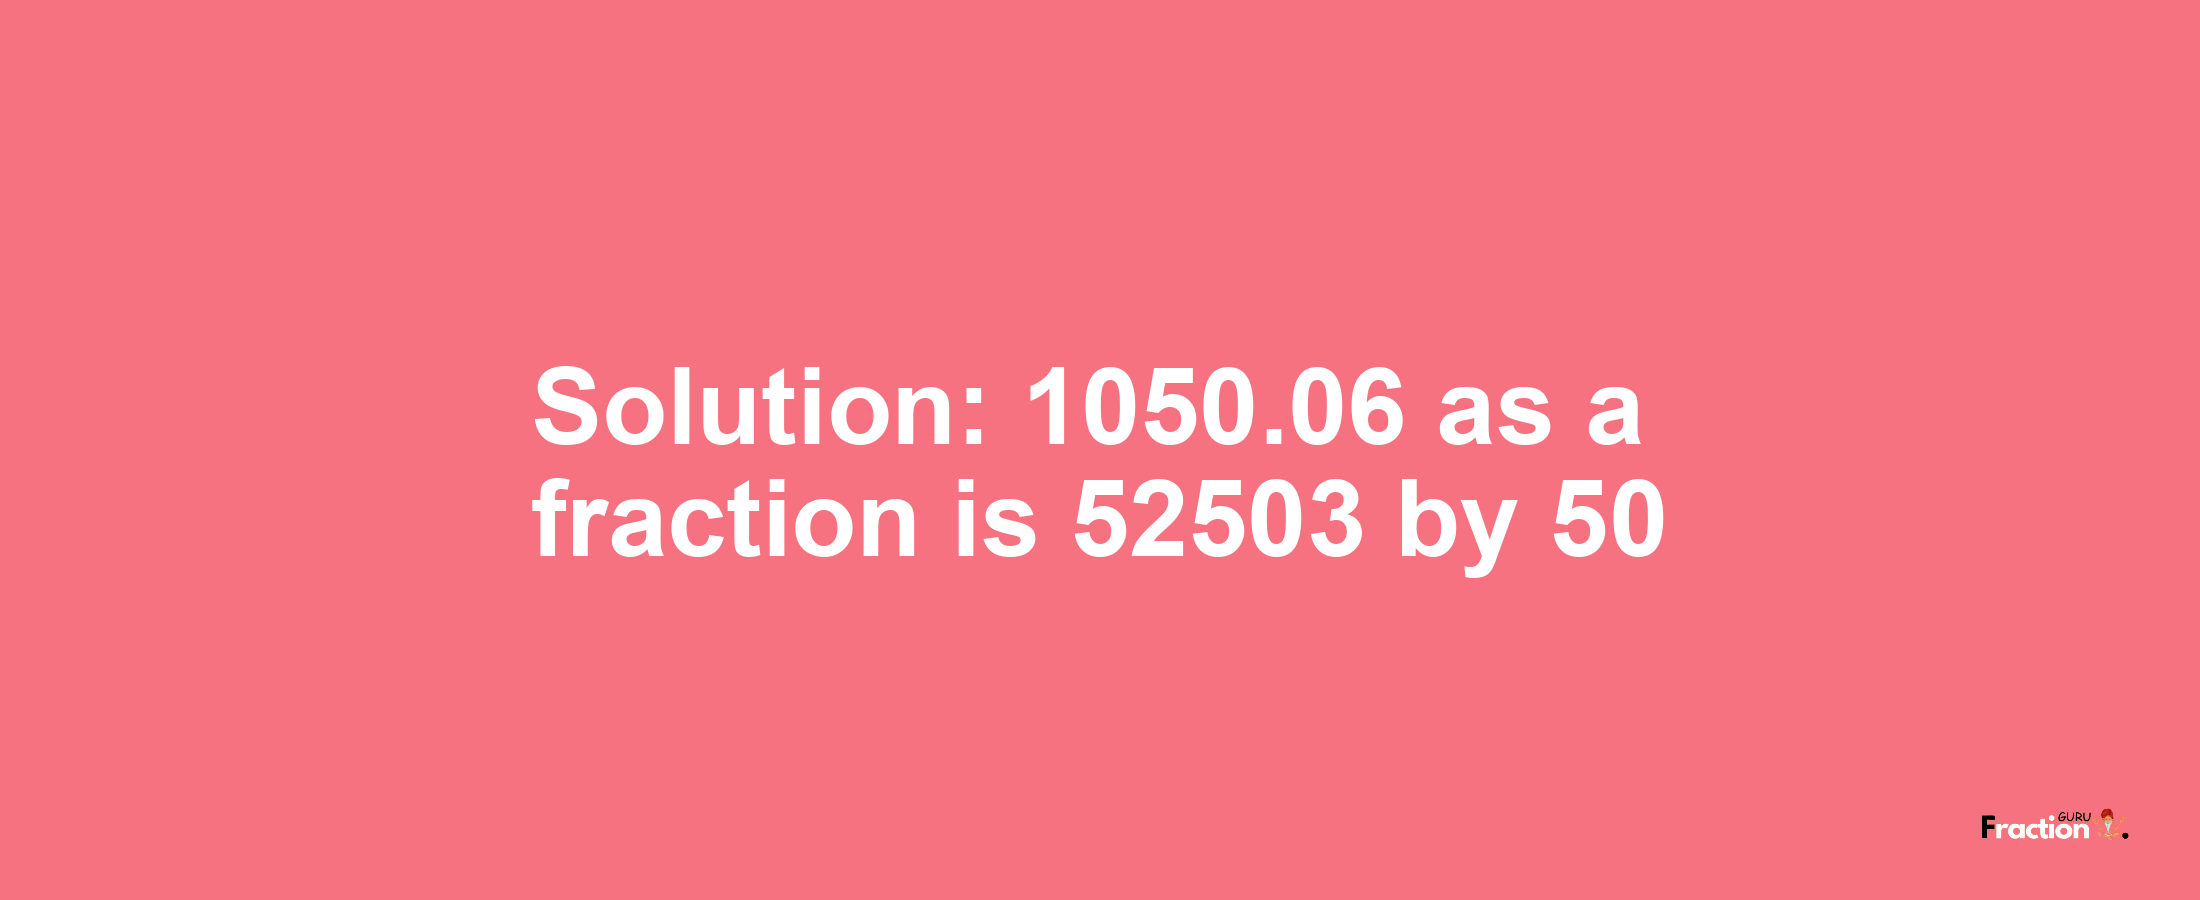 Solution:1050.06 as a fraction is 52503/50